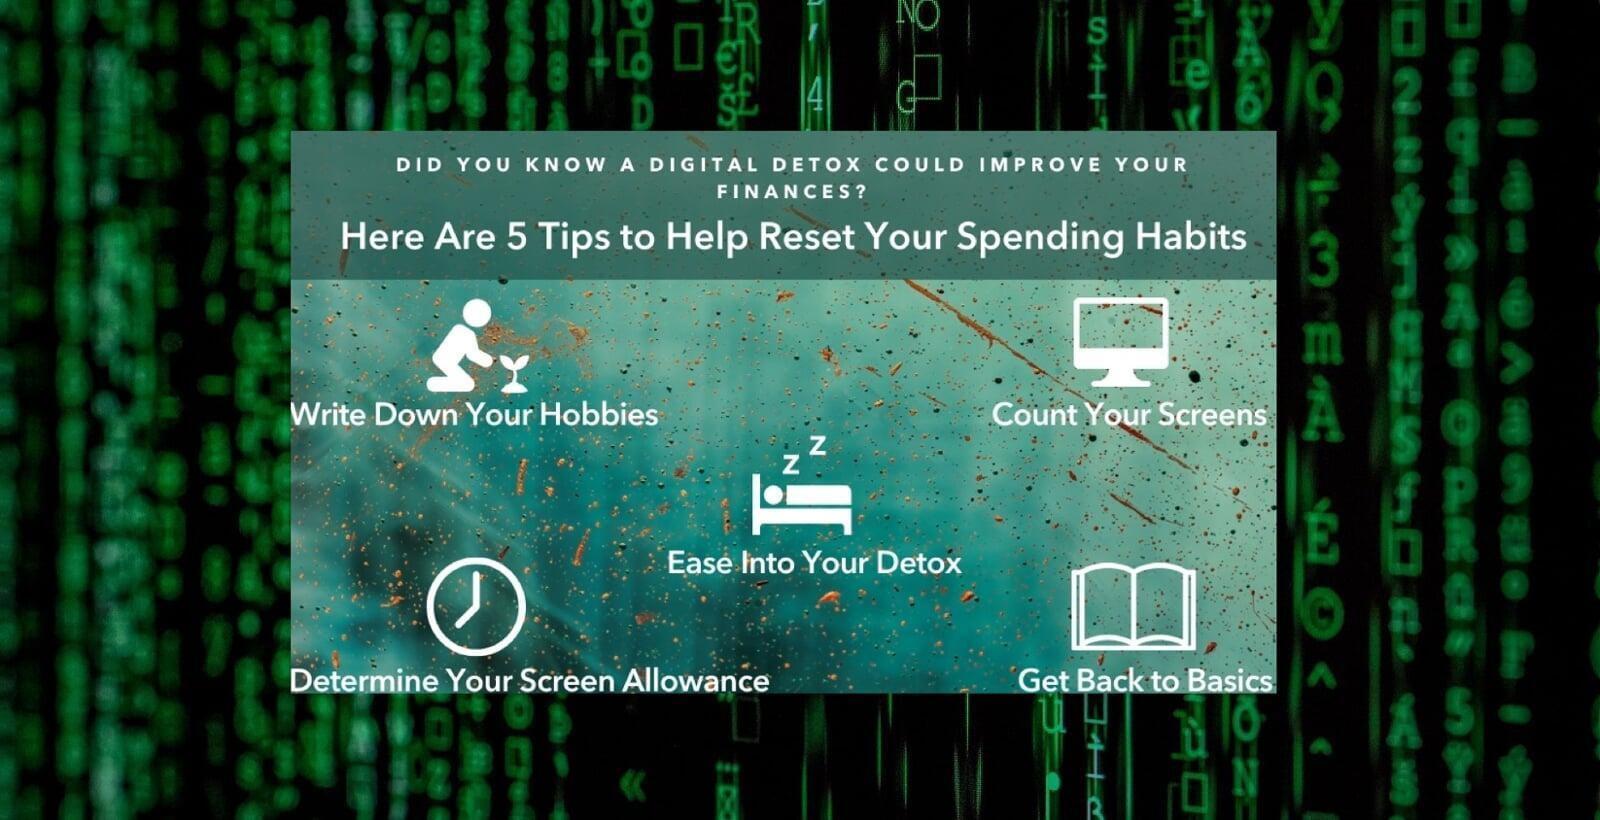 Did You Know a Digital Detox Could Improve Your Finances? Here Are 5 Tips to Help Reset Your Spending Habits